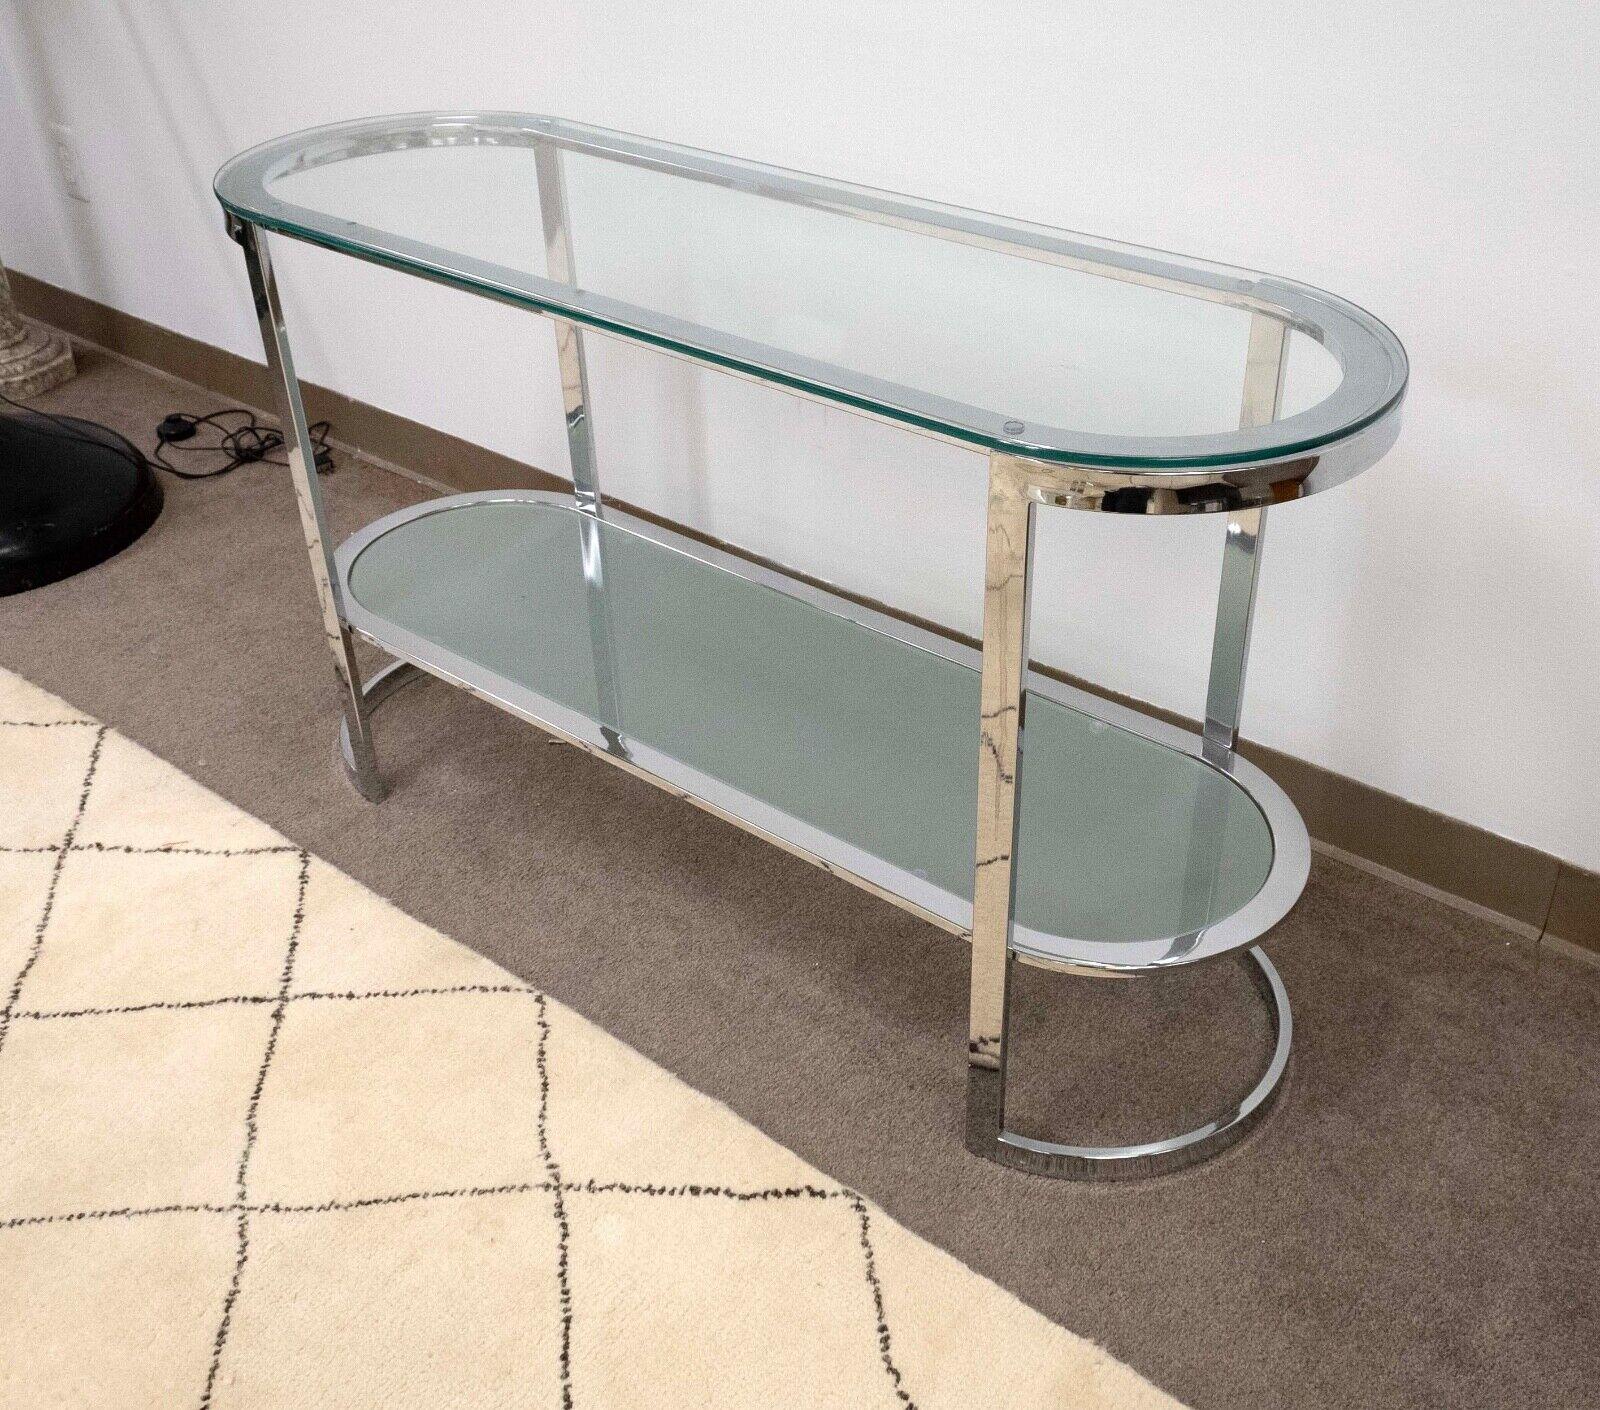 Glass & Curved Chrome Console Table Contemporary Modern In Good Condition For Sale In Keego Harbor, MI